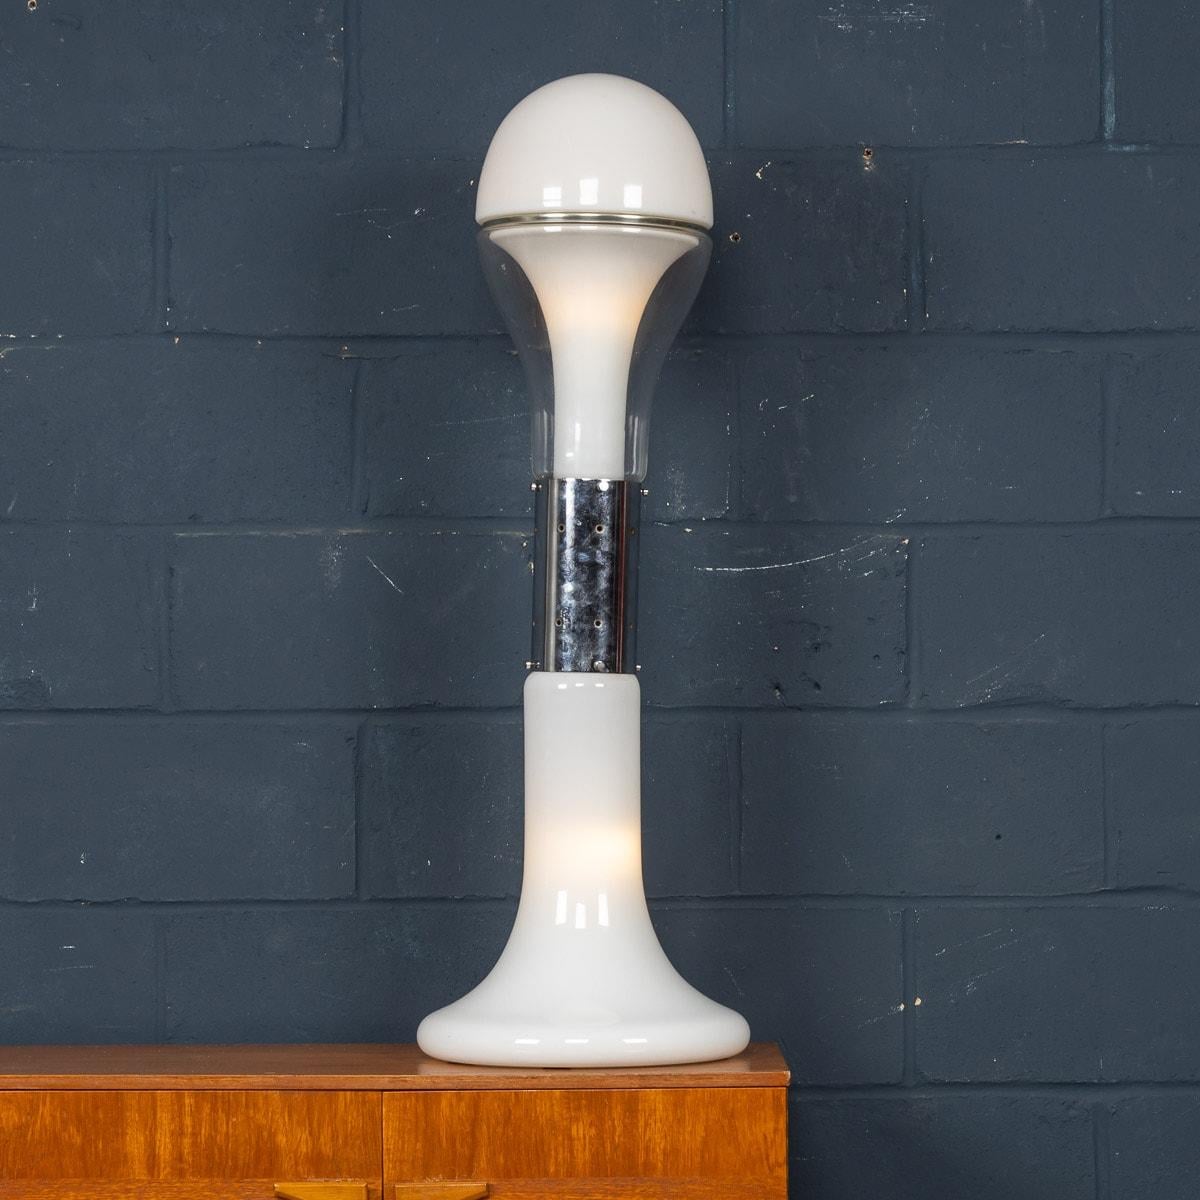 A stunning vintage floor lamp in chromed metal, opaline glass and clear glass by Carlo Nason from the 1970s. The lamp consists of three parts of Murano hand blown glass. This chrome and glass lamp exemplifies Carlo Nason’s workmanship. Nason has